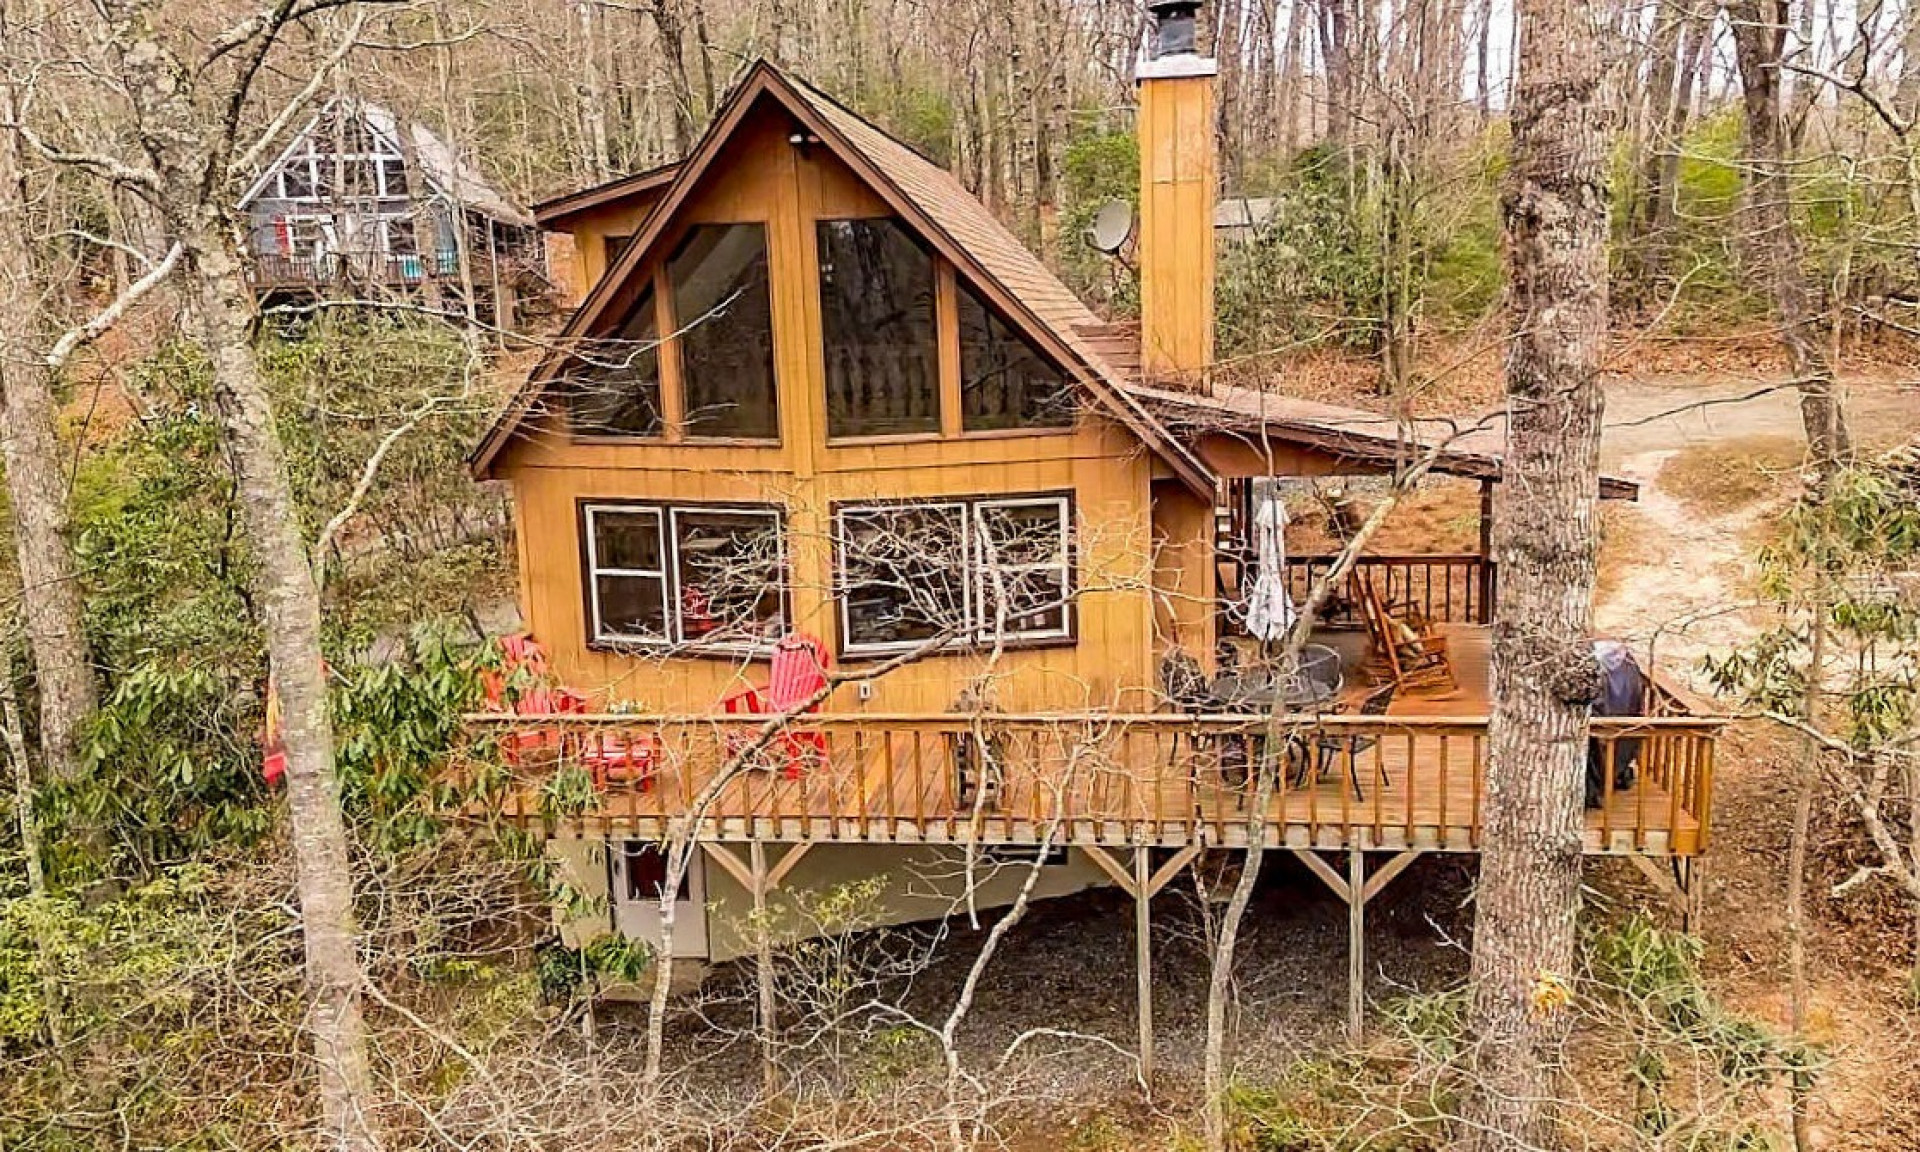 Furnished 2-bedroom, 2-bath mountain chalet in the Fleetwood Falls community of Southern Ashe County